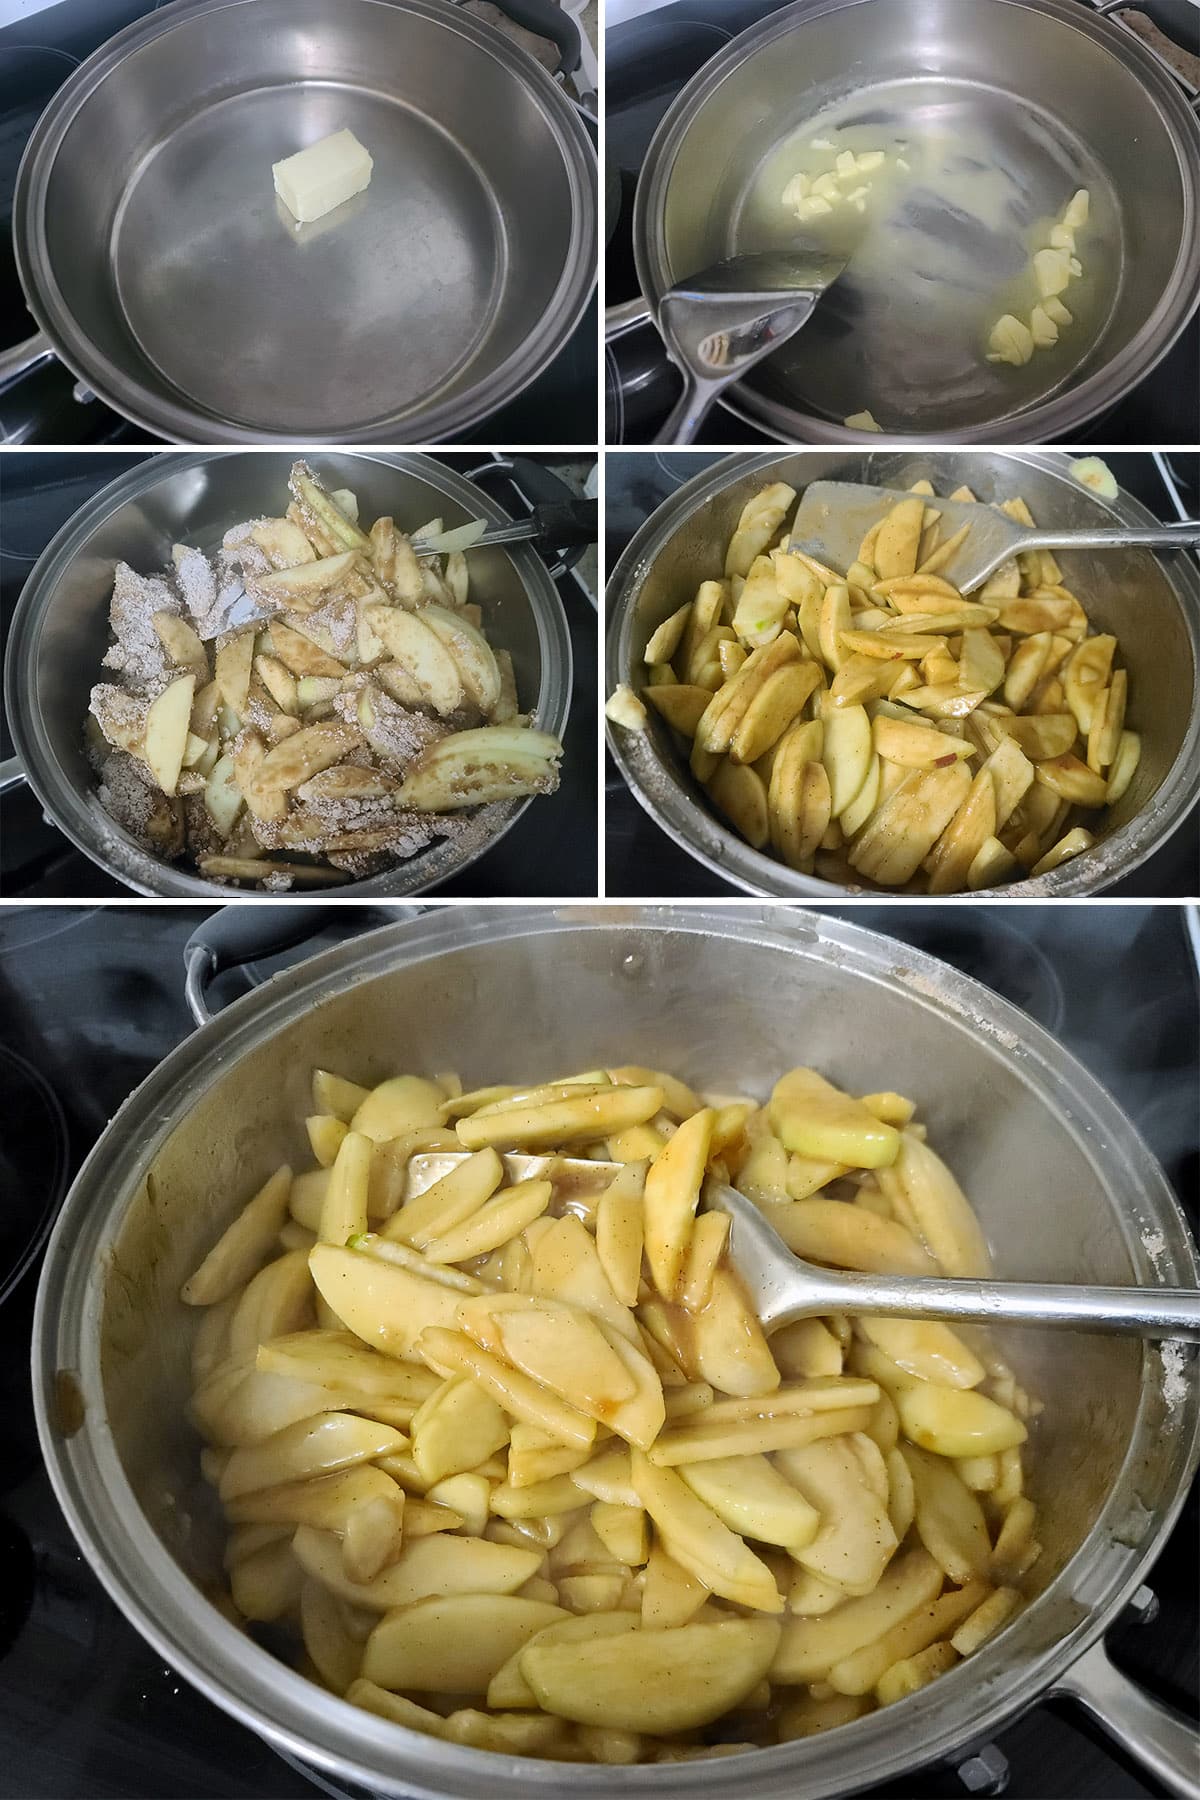 A 5 part image showing the seasoned apple slices being cooked in a large pan.